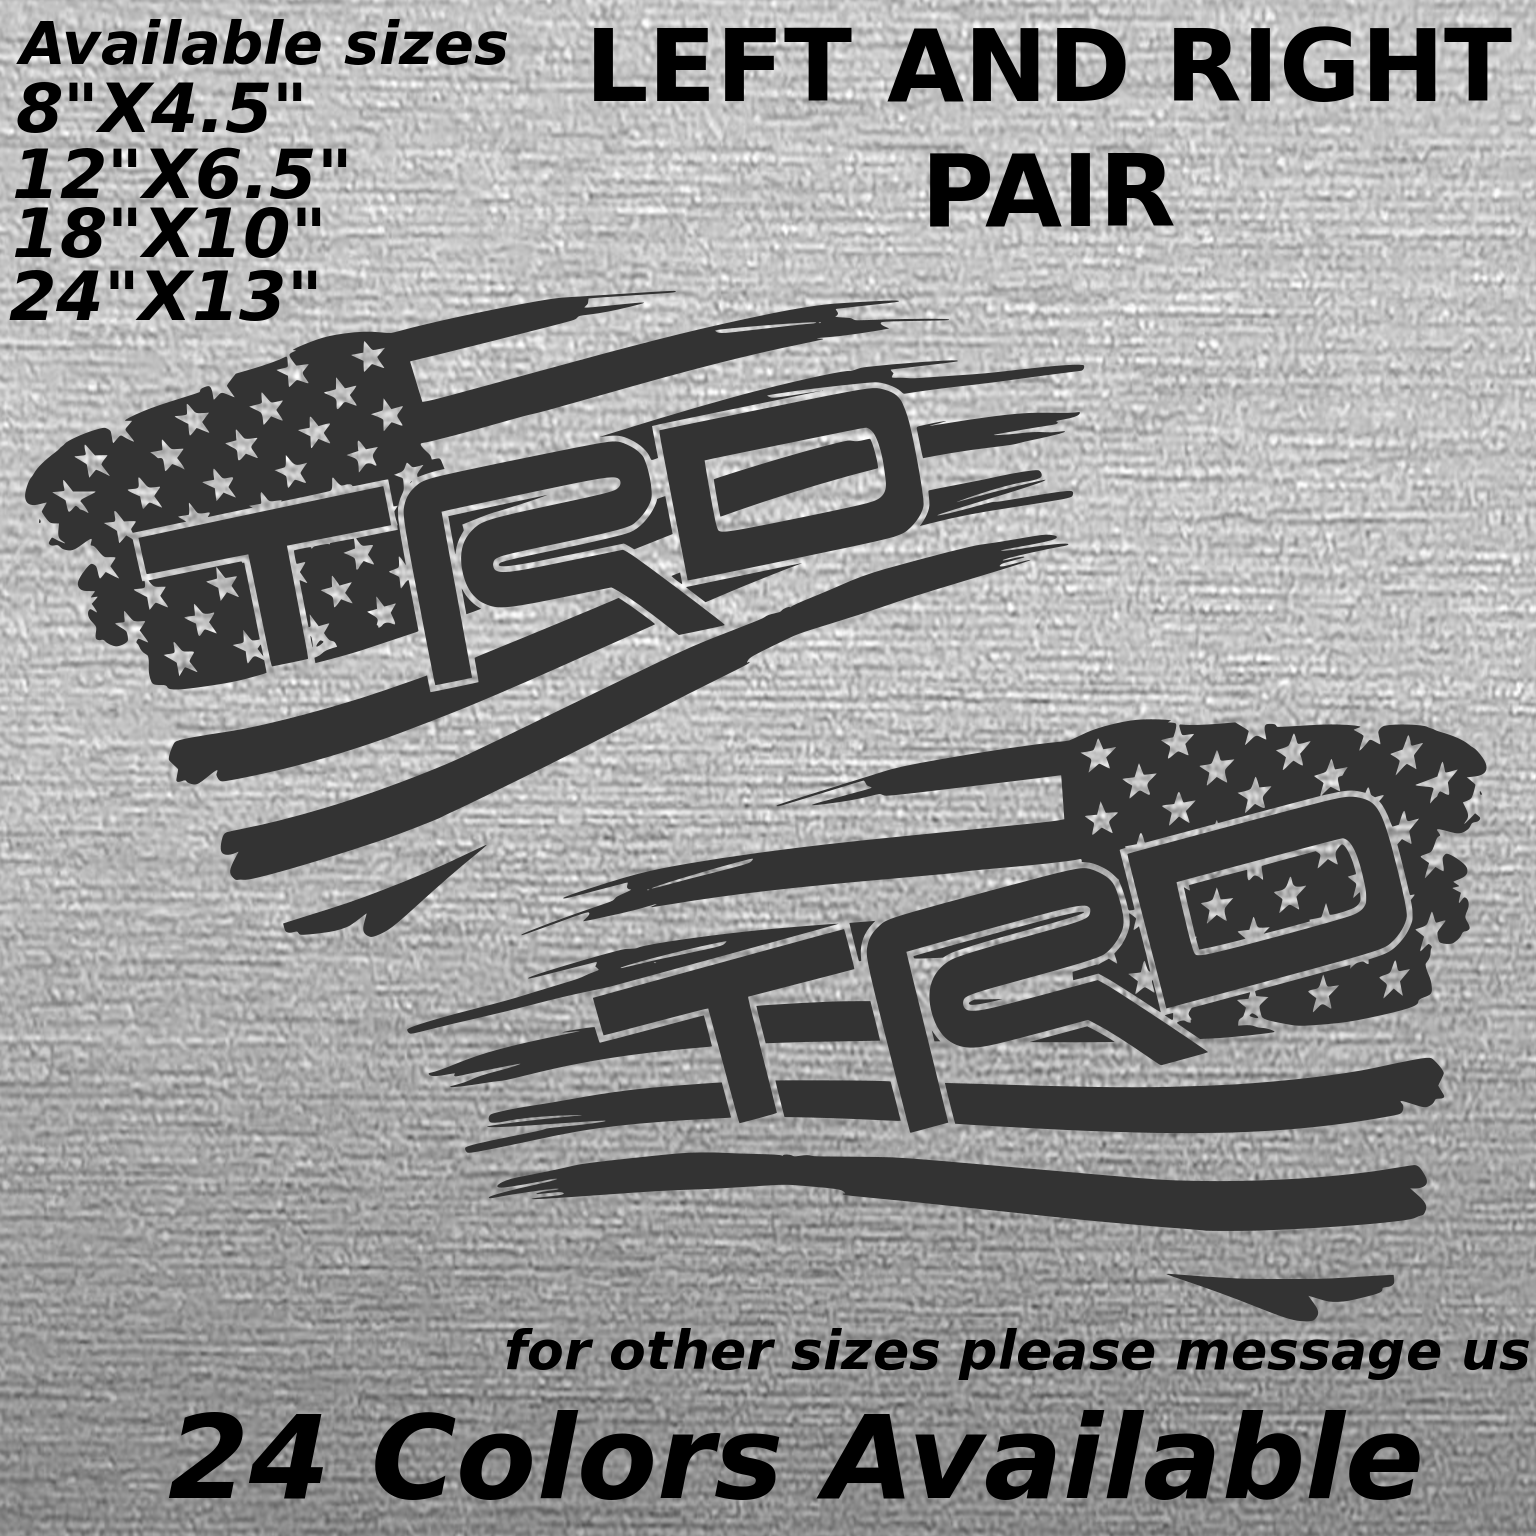 TRD Toyota racing development Tattered flag decal sticker bed side tacoma PAIR